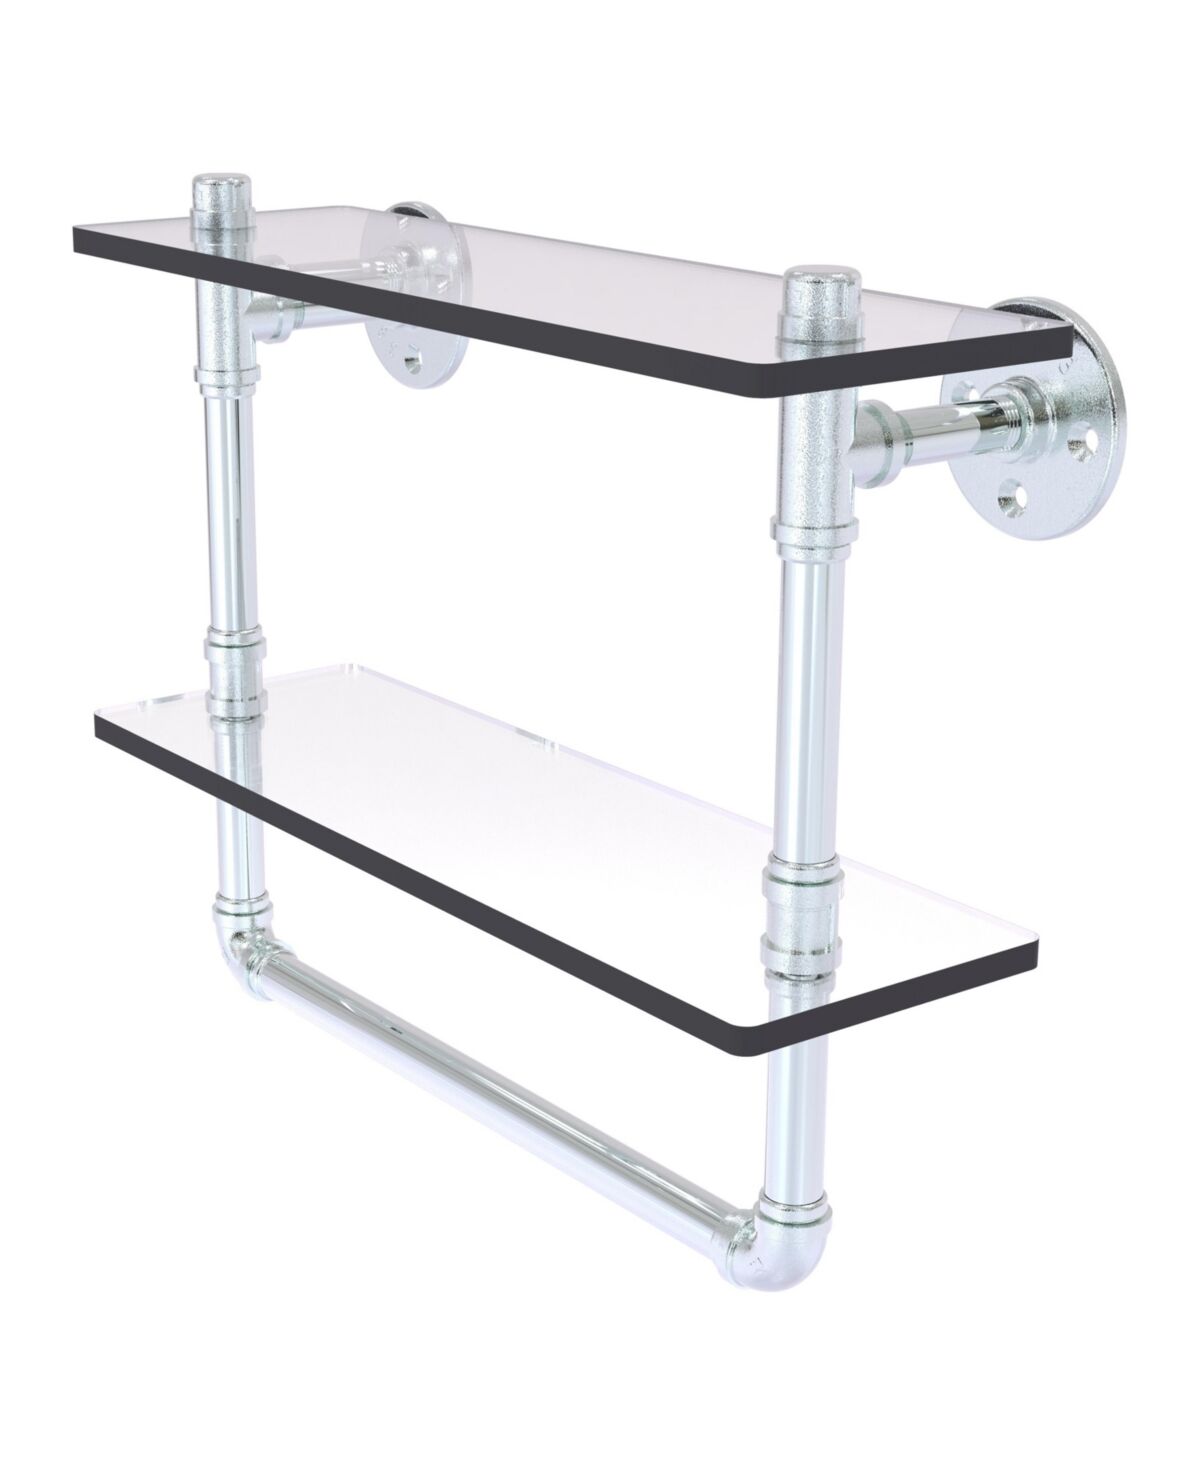 Allied Pipeline Collection 16 Inch Double Glass Shelf with Towel Bar - Polished chrome